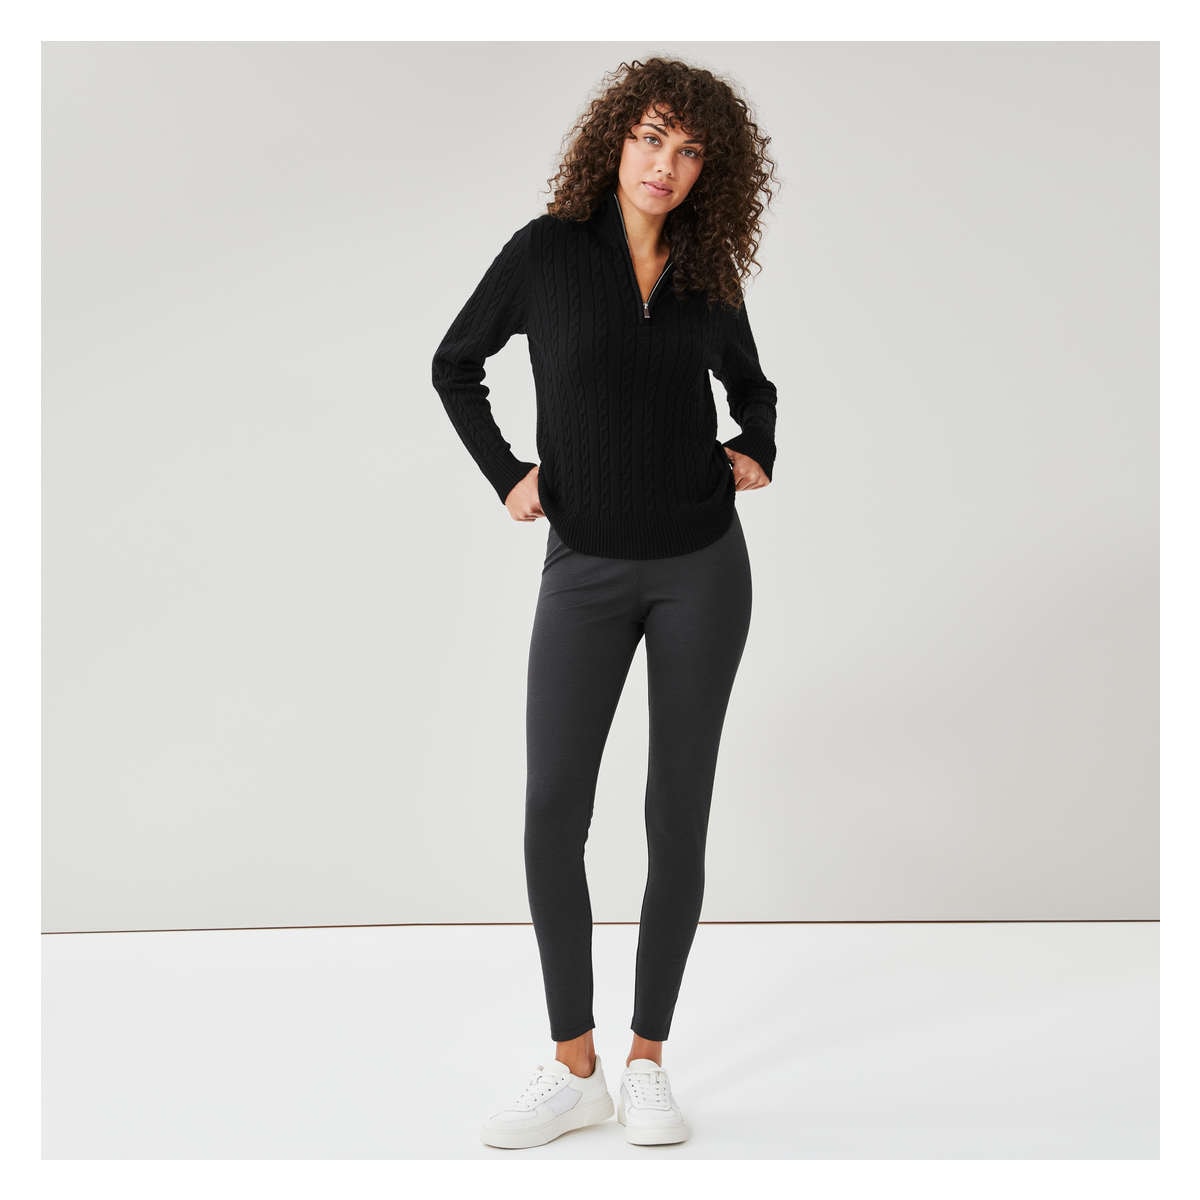 Shop Textured Leggings with Elasticated Waist Online